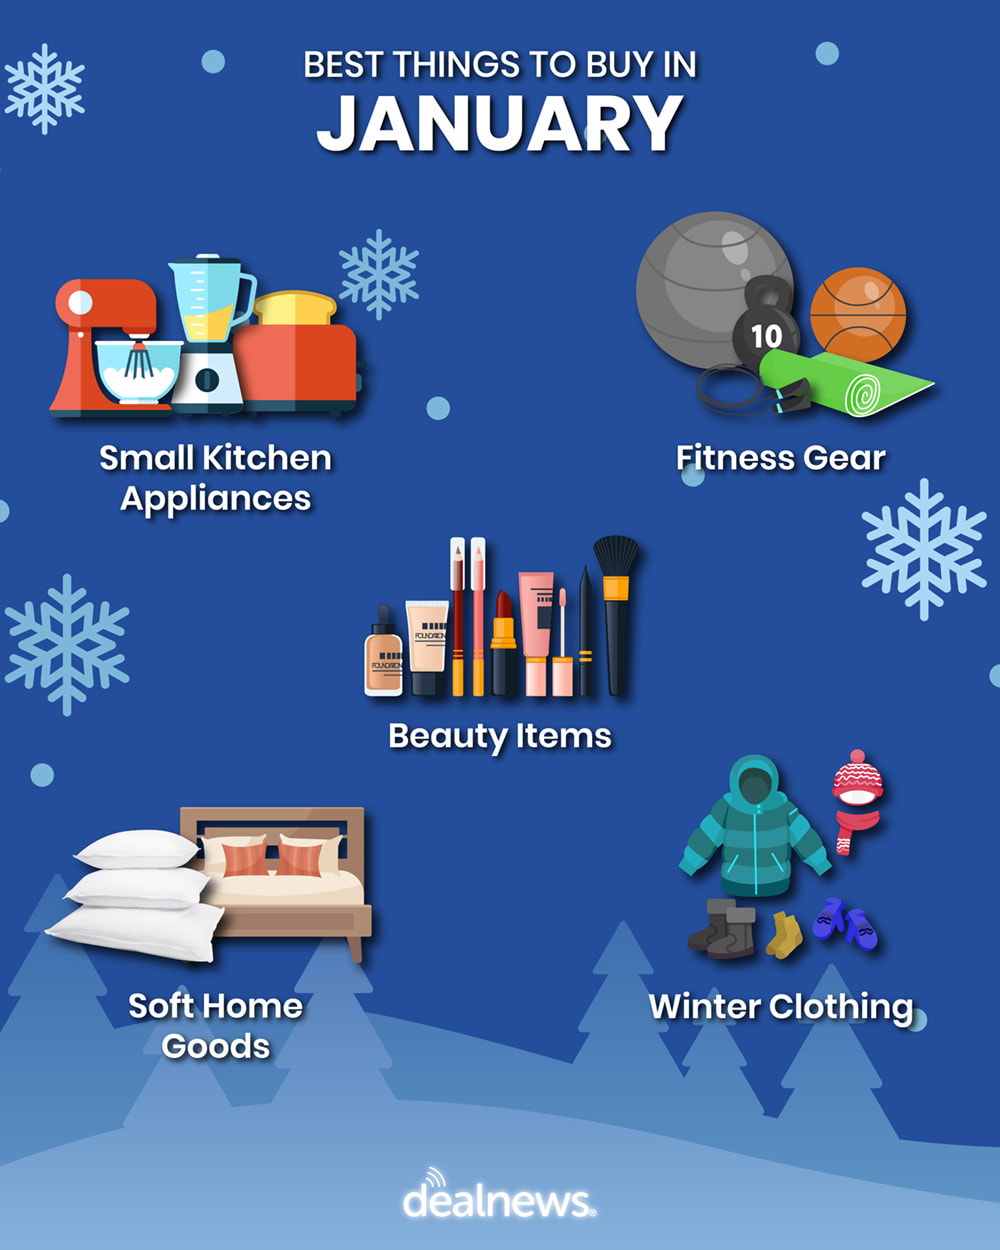 https://c.dlnws.com/image/upload/c_limit,f_auto,q_auto,w_1800/v1704128855/Blog%20Infographics/DN-what-to-buy-in-January-2024-infographic.jpg